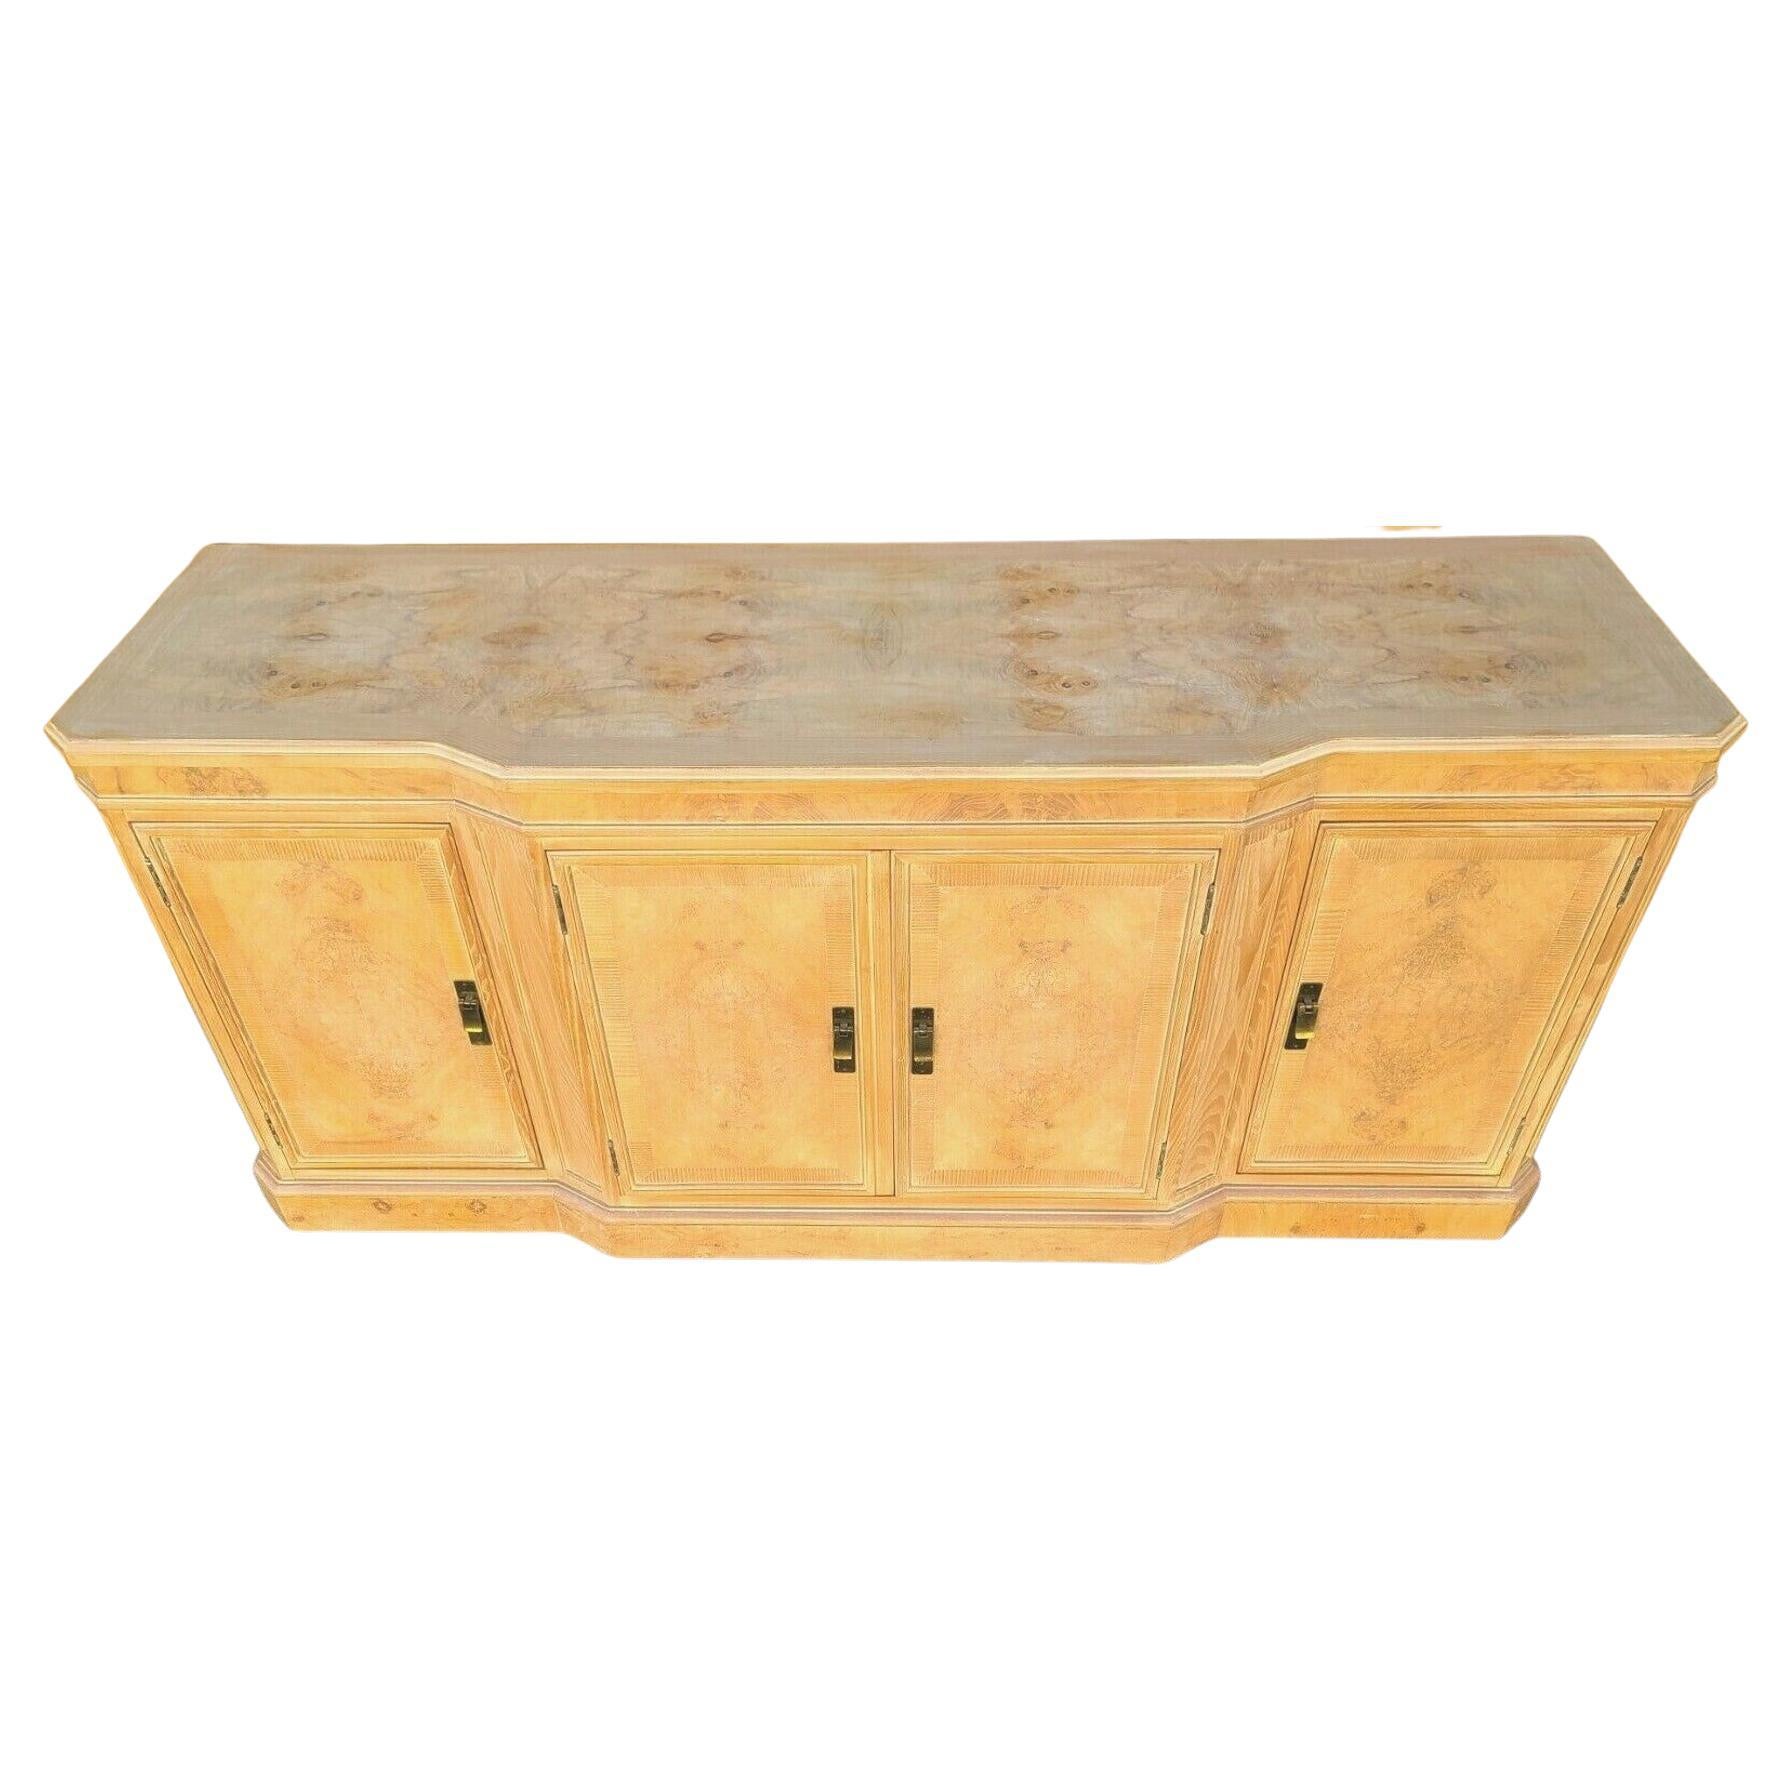 Burl Sideboard Buffet Cabinet by Heritage from Their Corinthian Collection